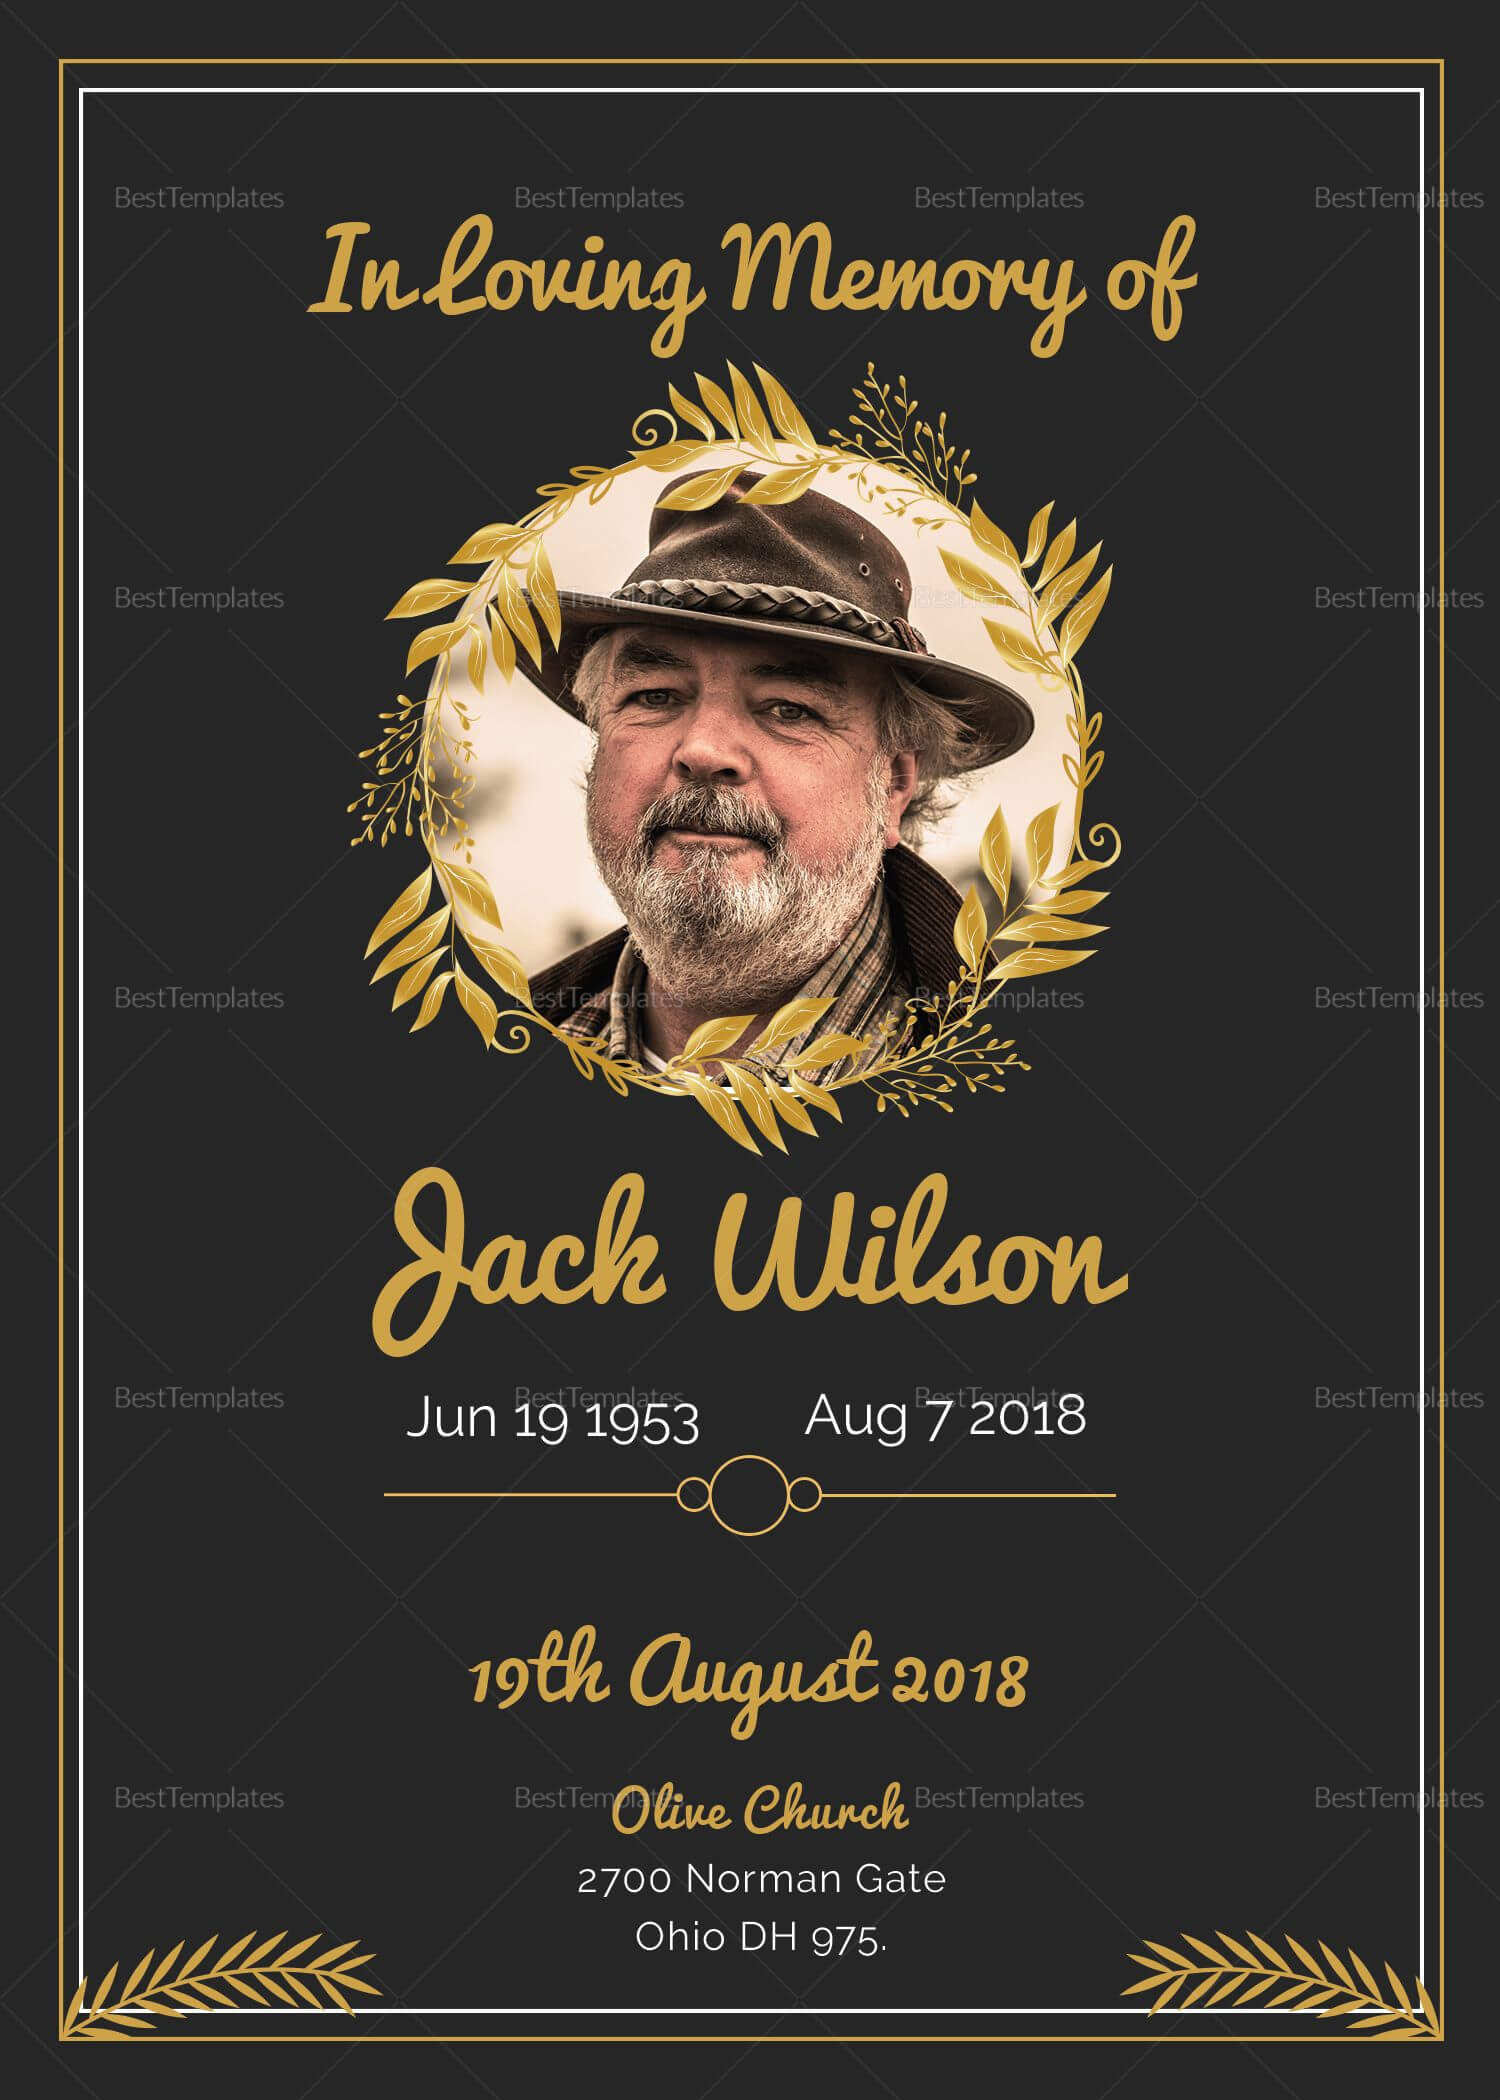 Funeral Invitation Card Template | Funeral Invitation With Regard To Funeral Invitation Card Template